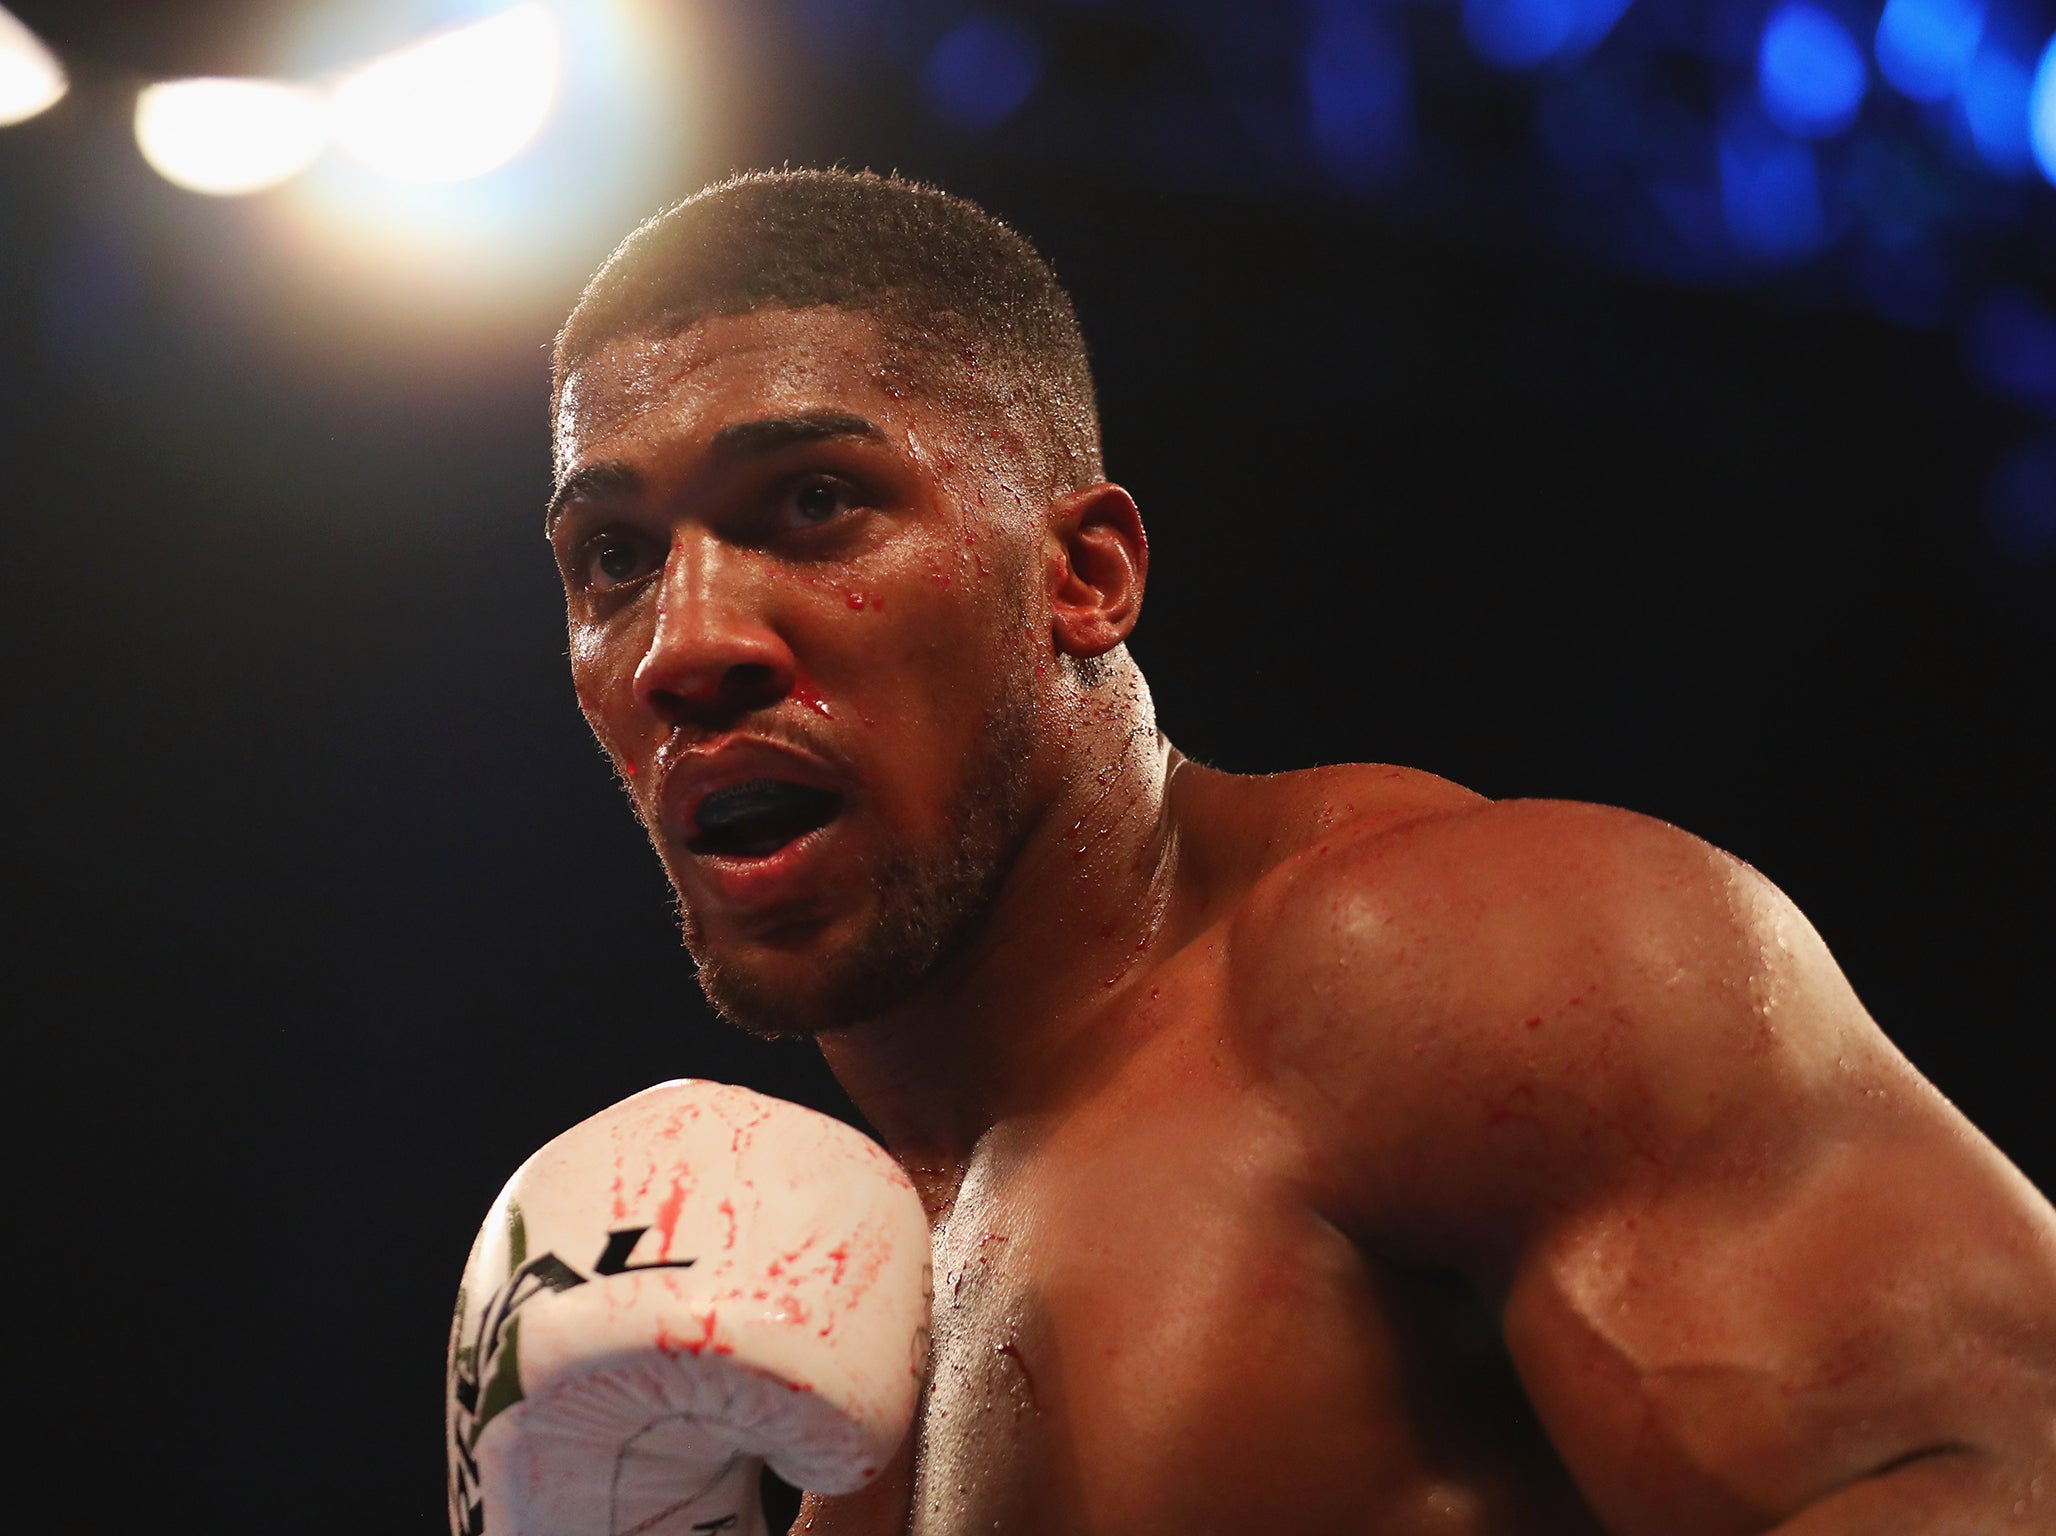 Joshua stopped Takam in the tenth round to go 20-0